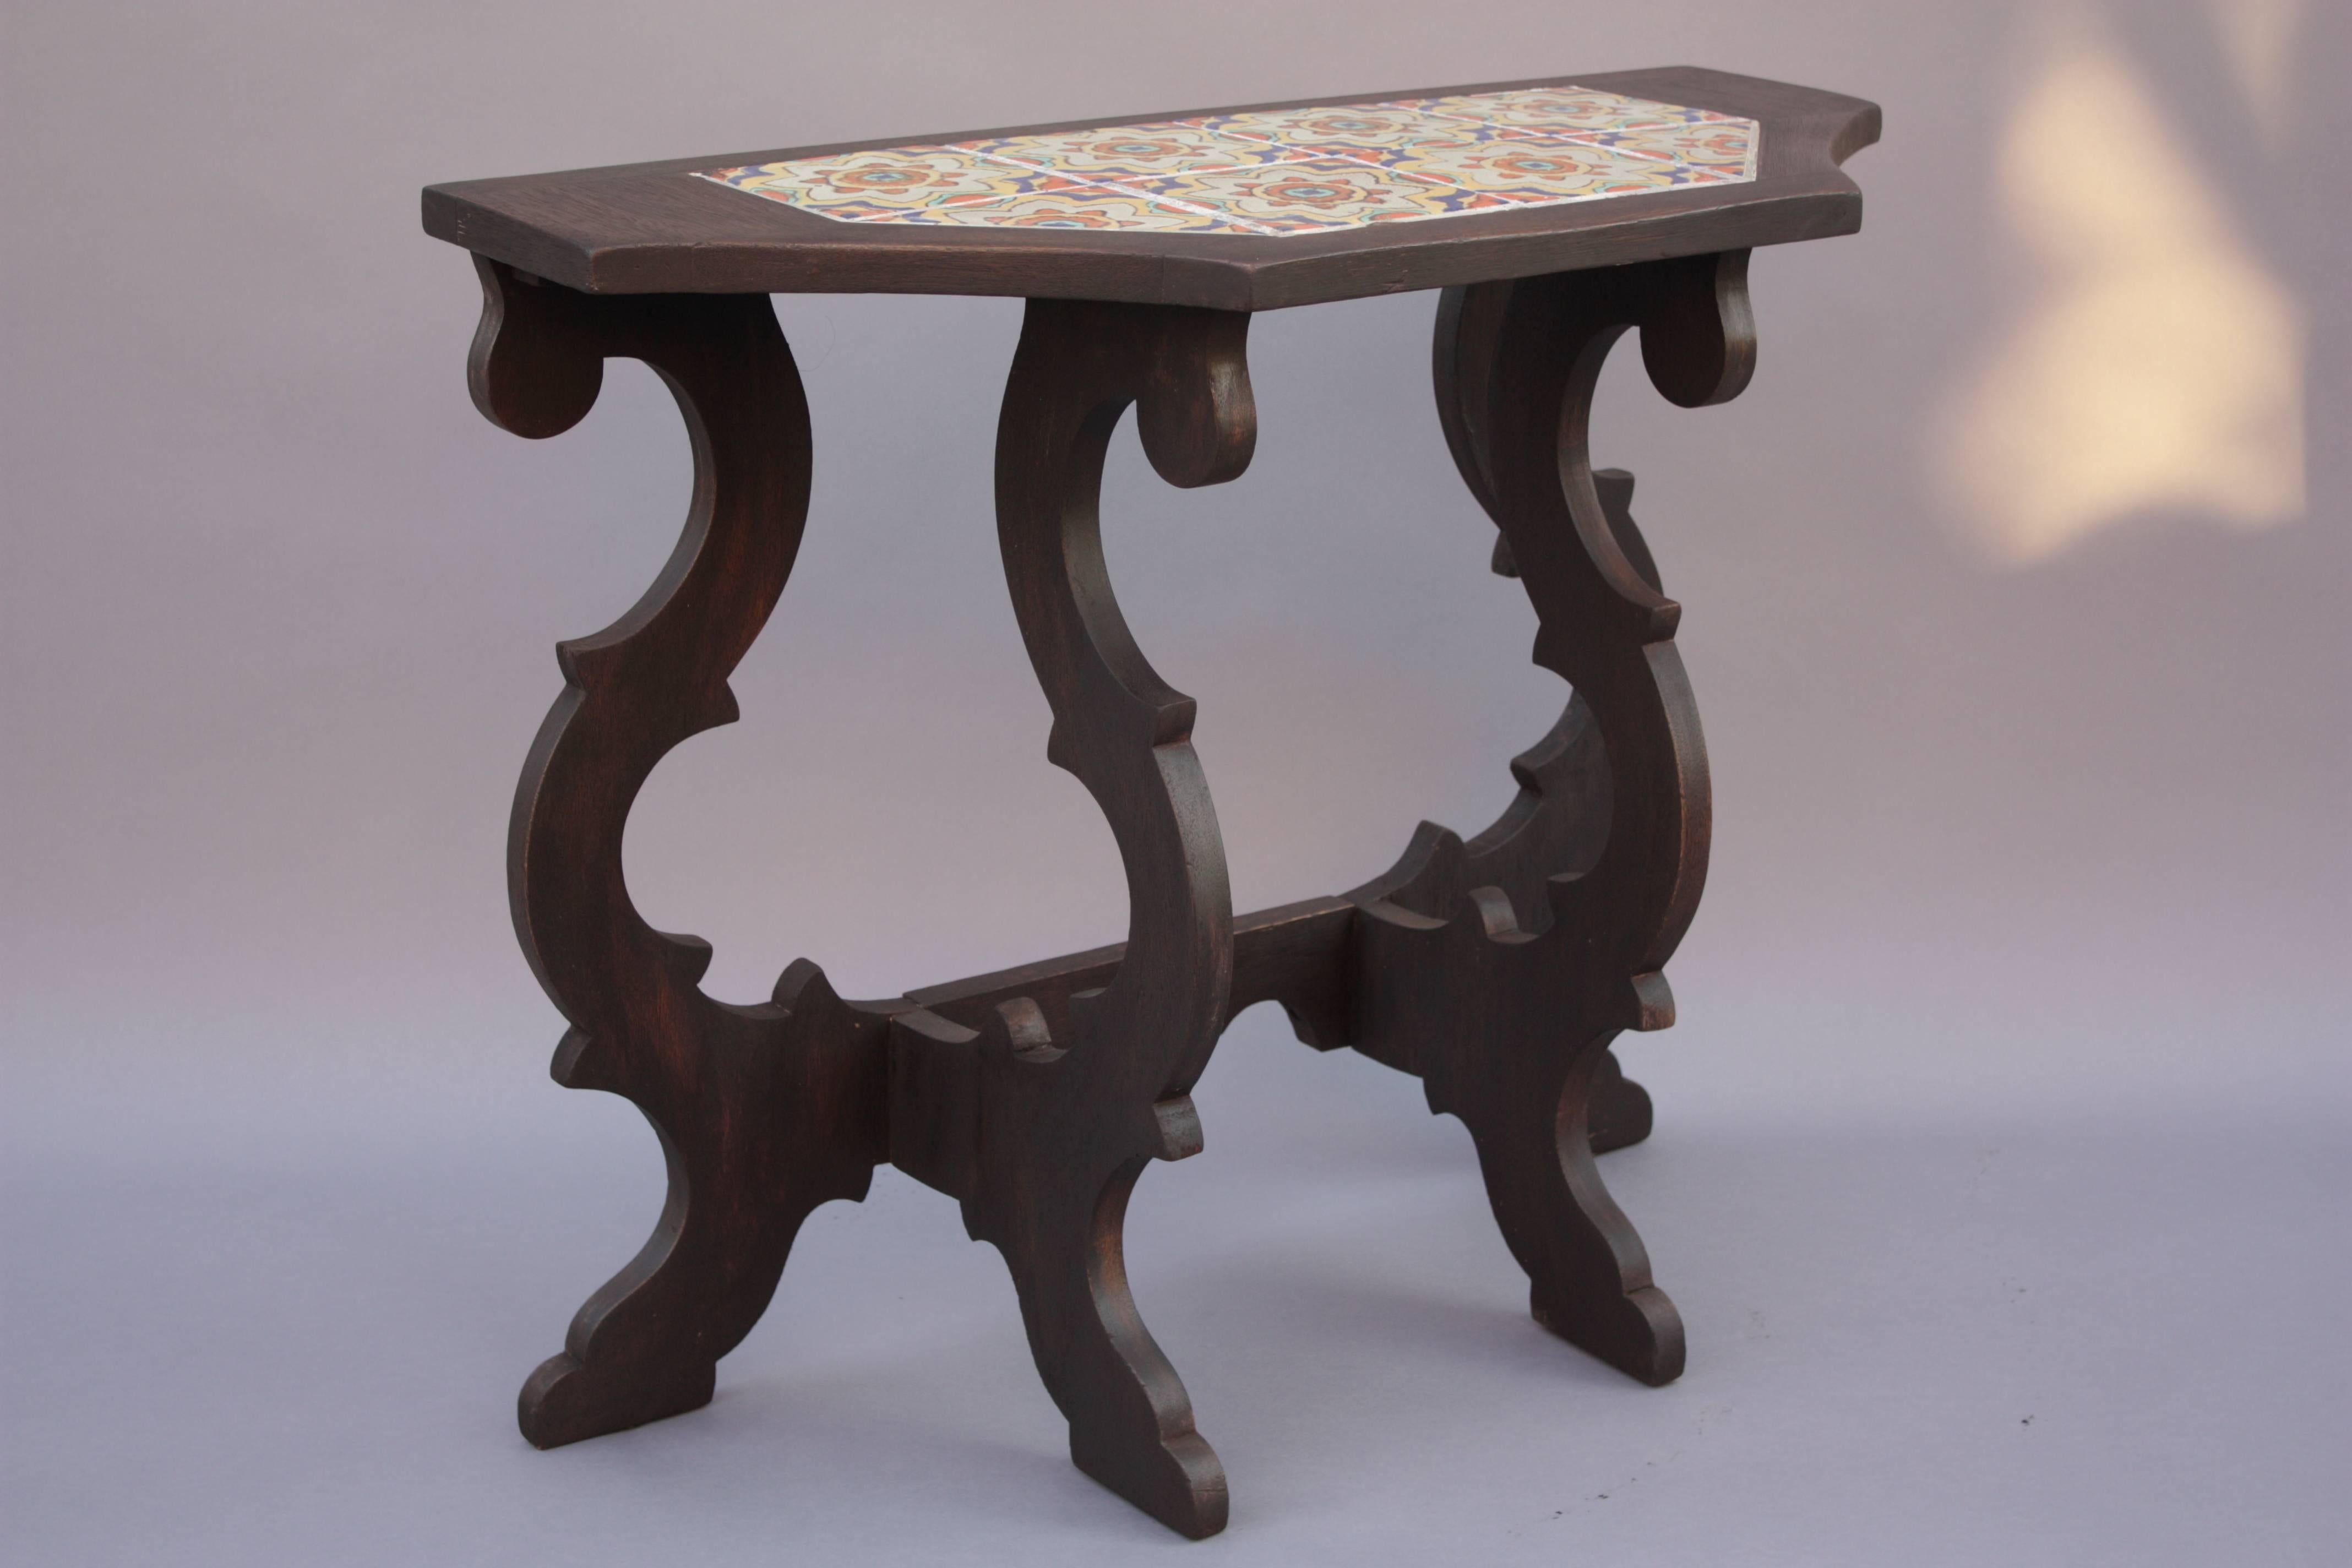 Spanish Colonial 1930s Spanish Revival Table with Tudor Tiles